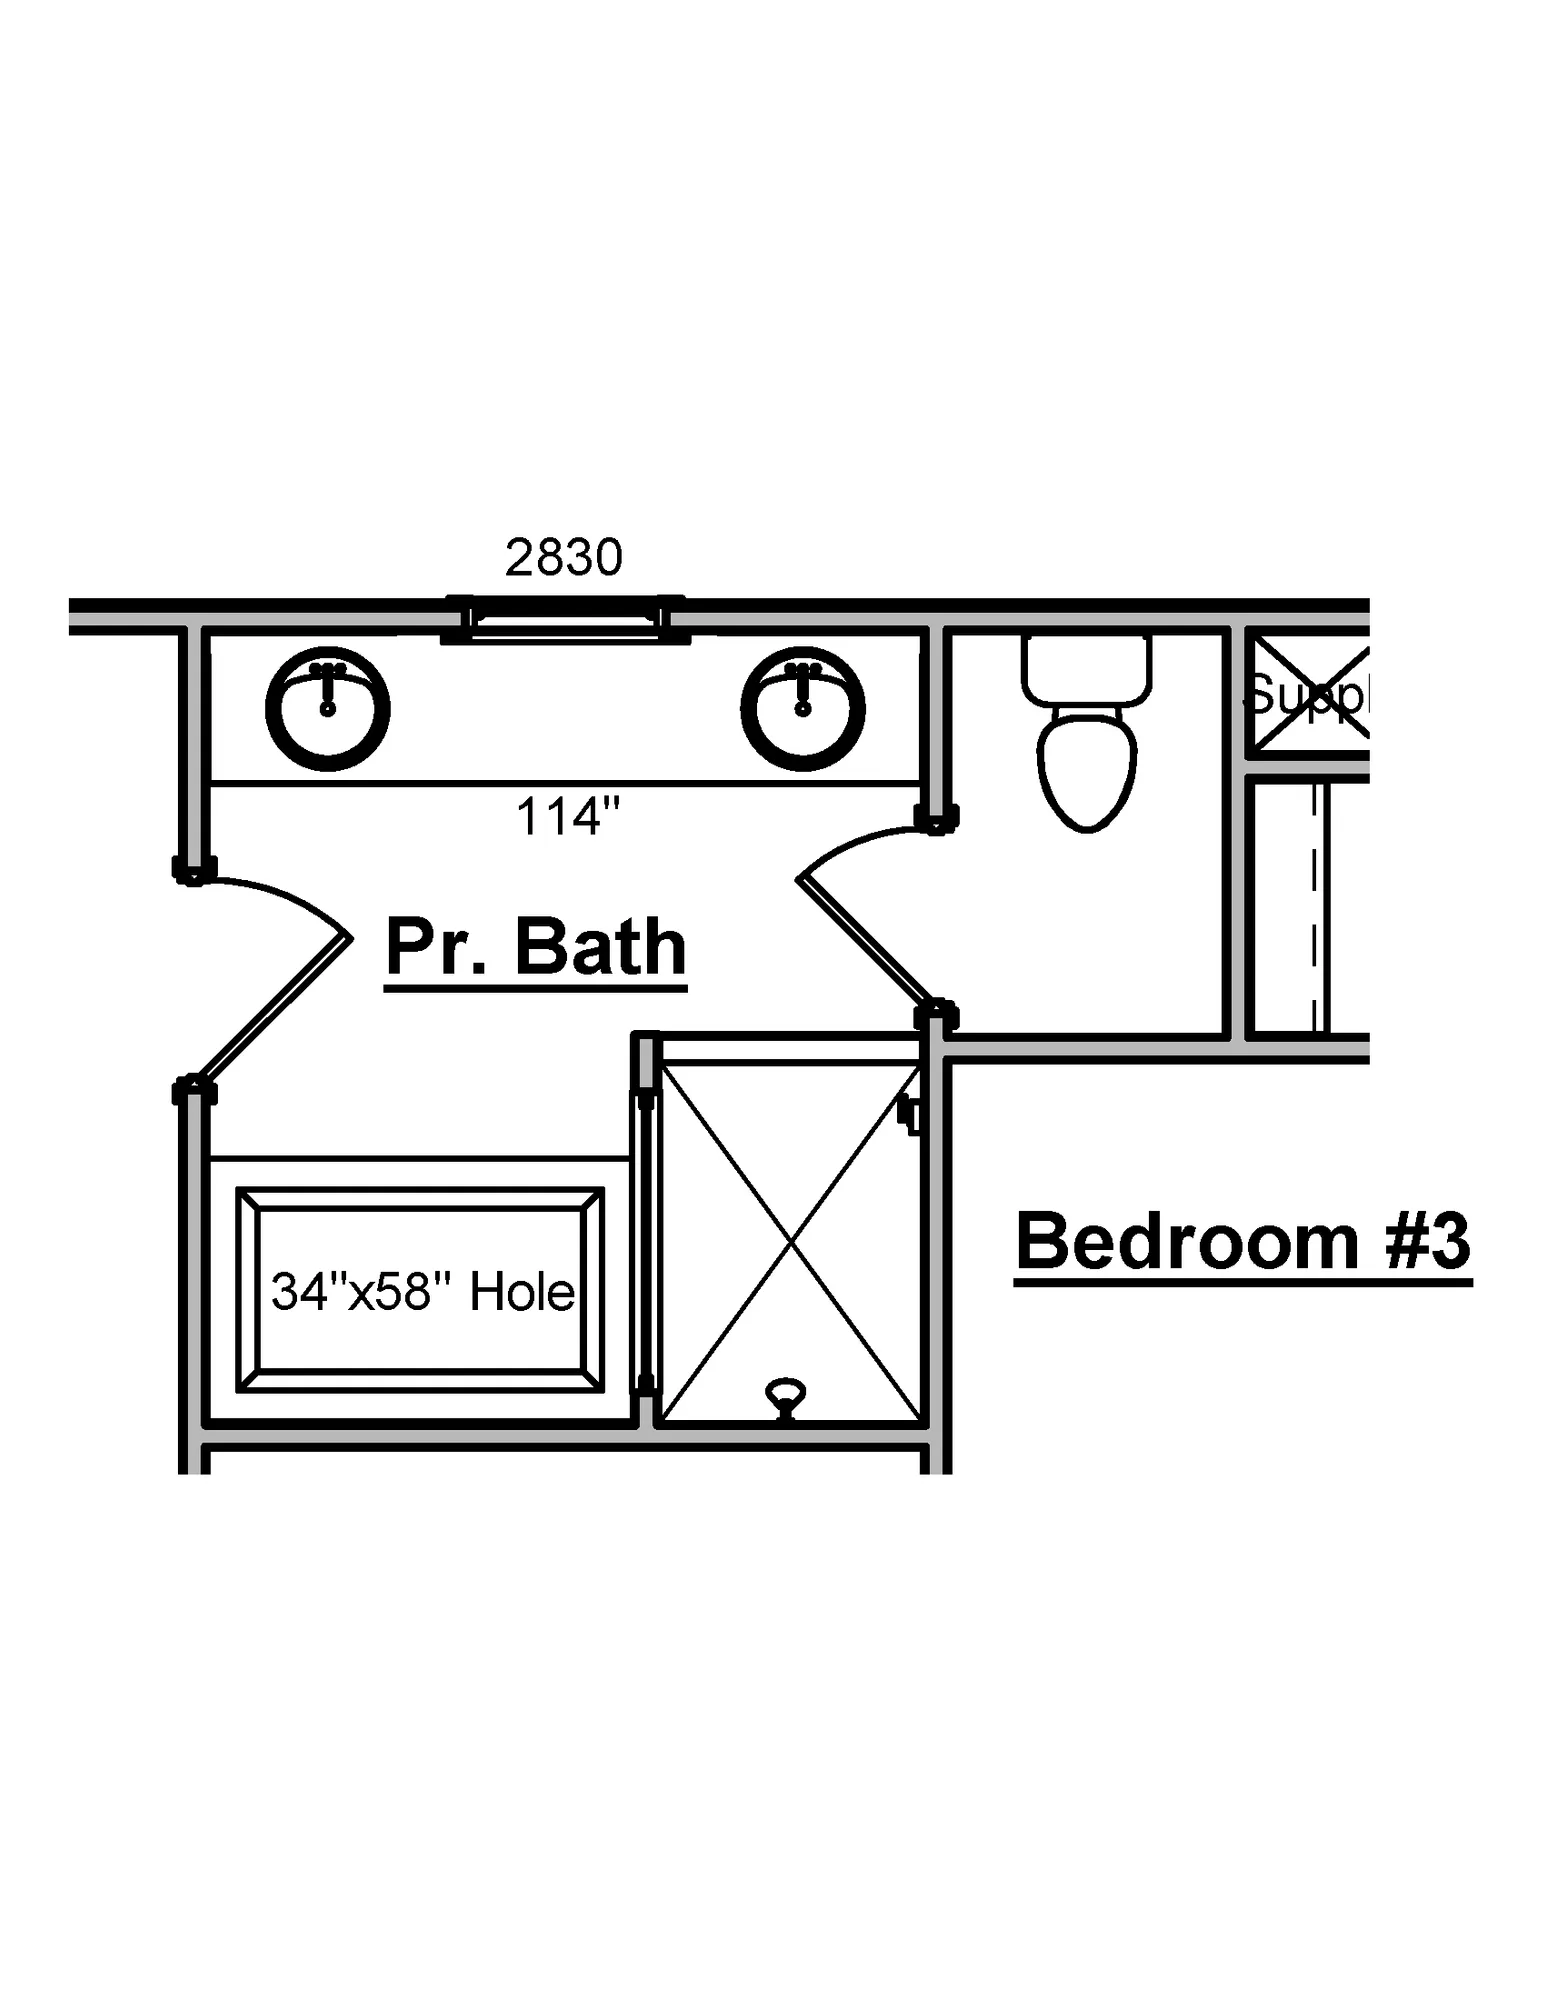 Primary Bath-Tub Option with Large Vanity - undefined